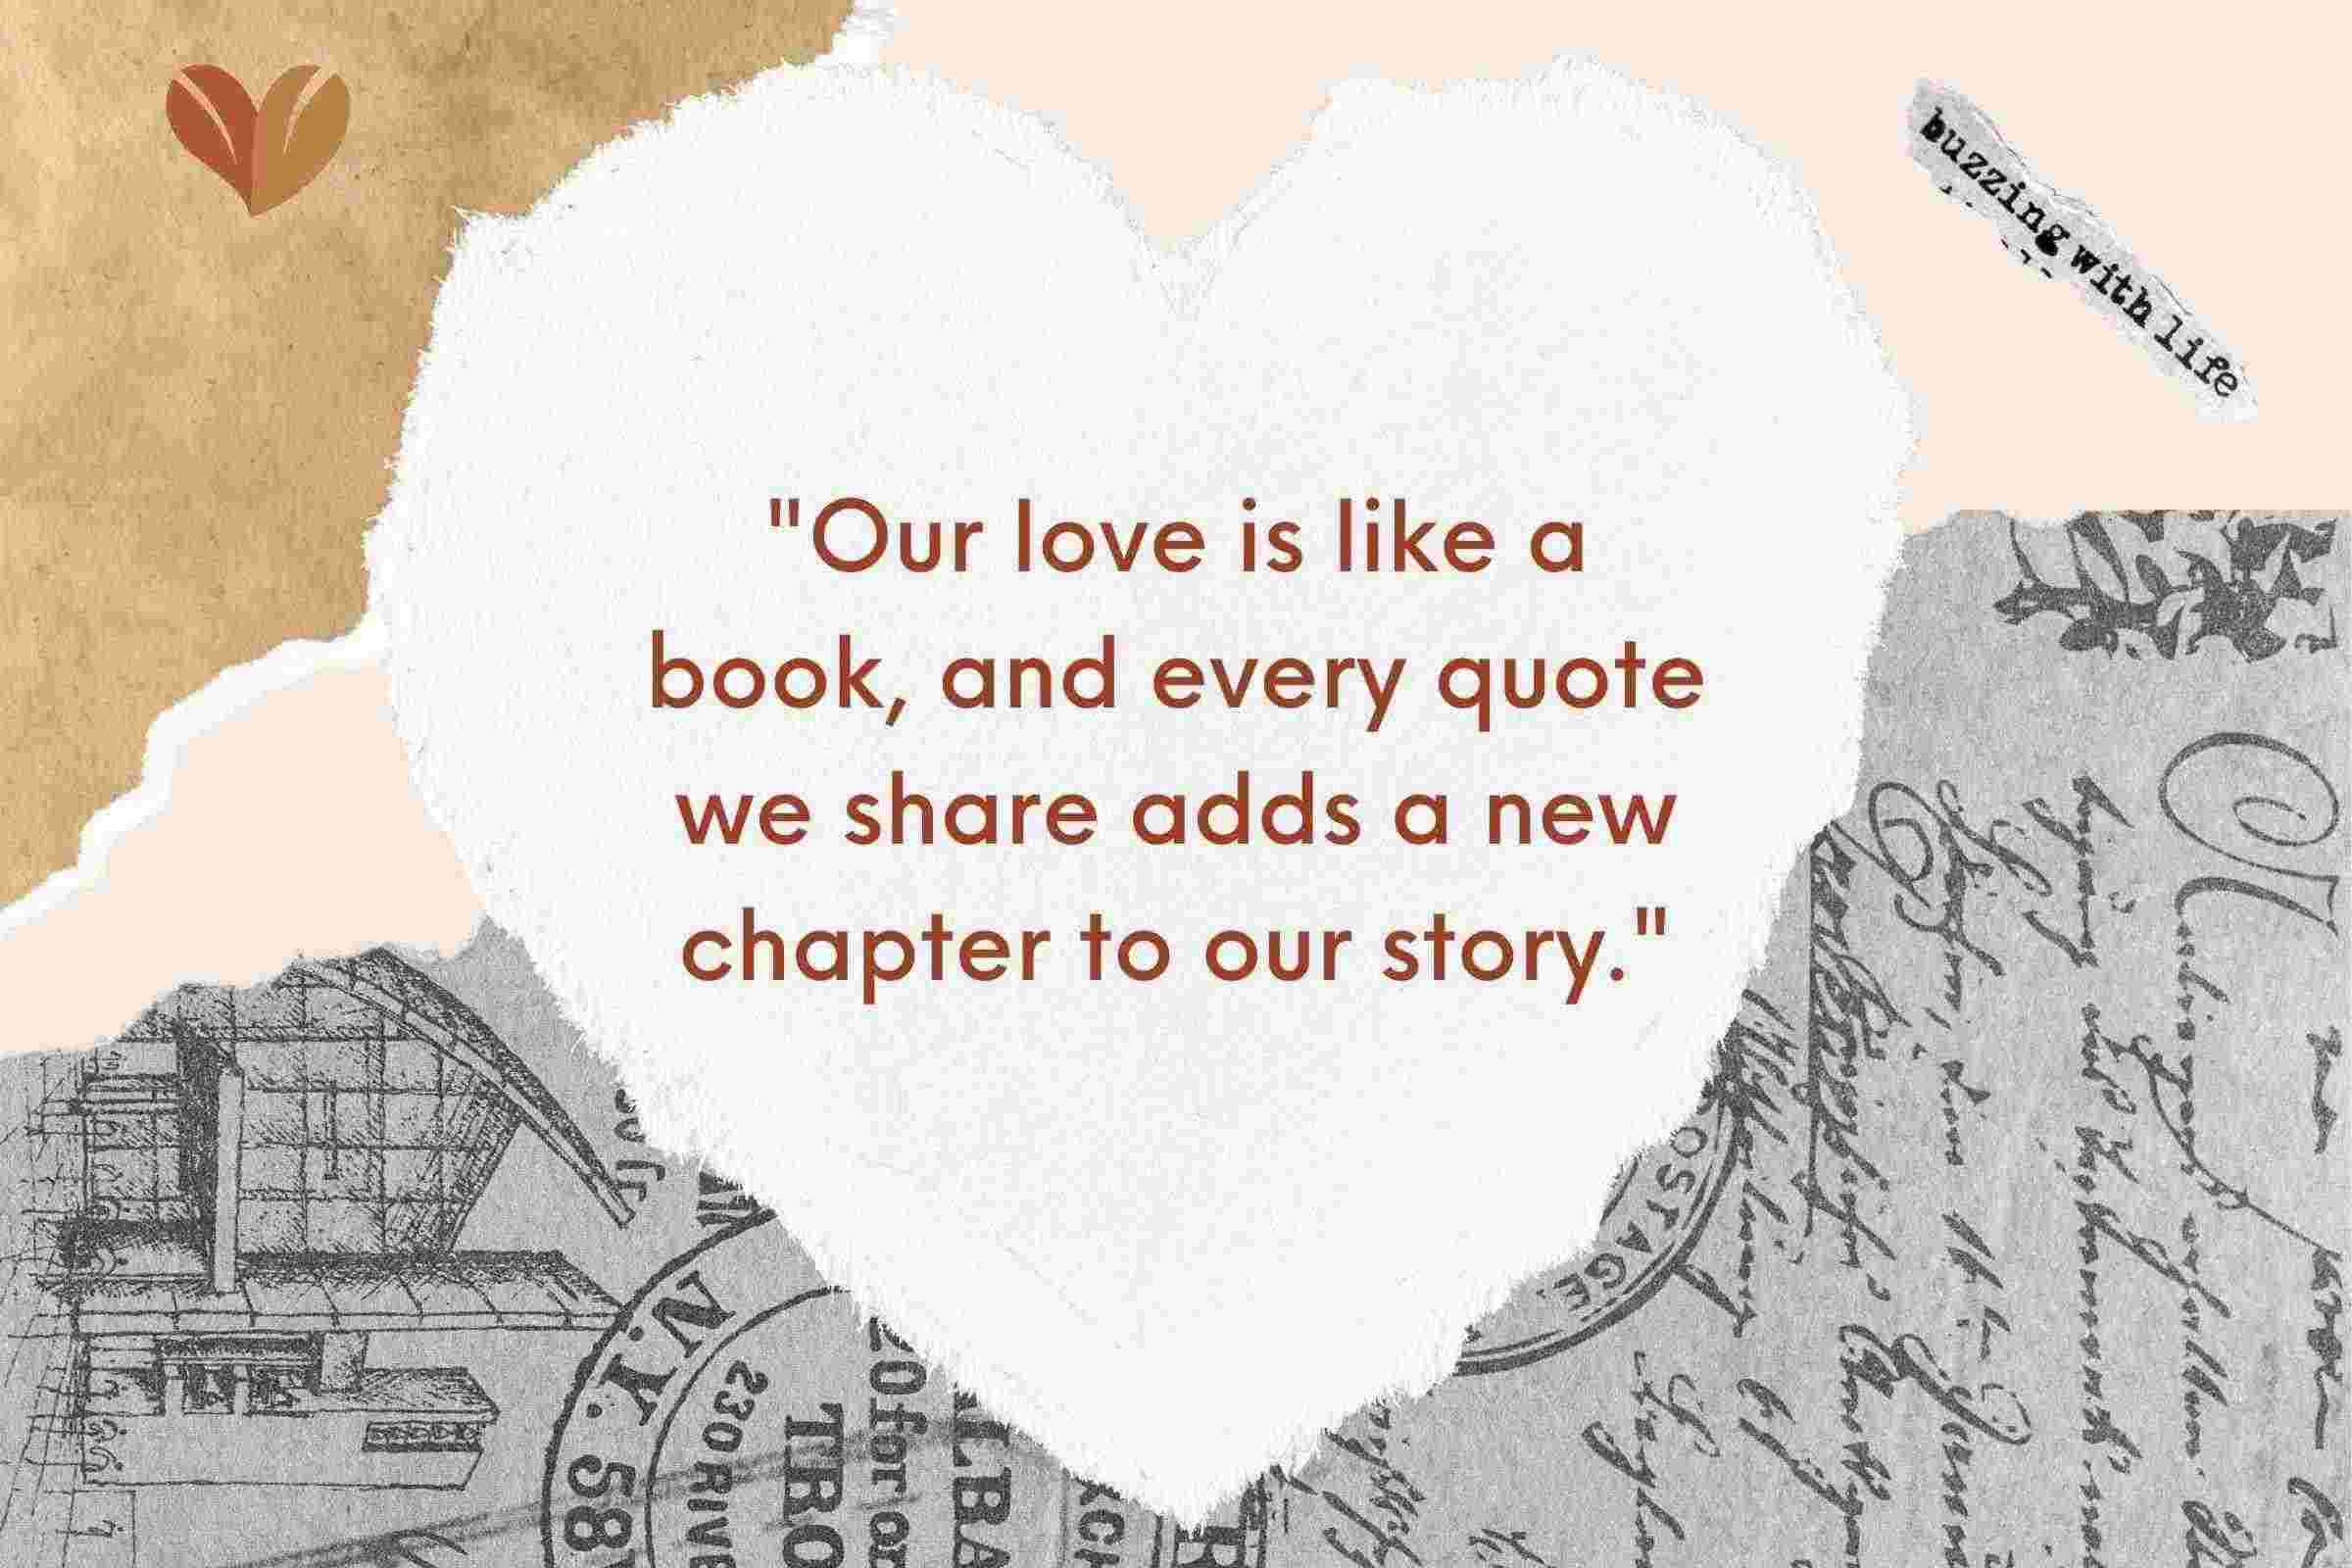 Our love is like a book